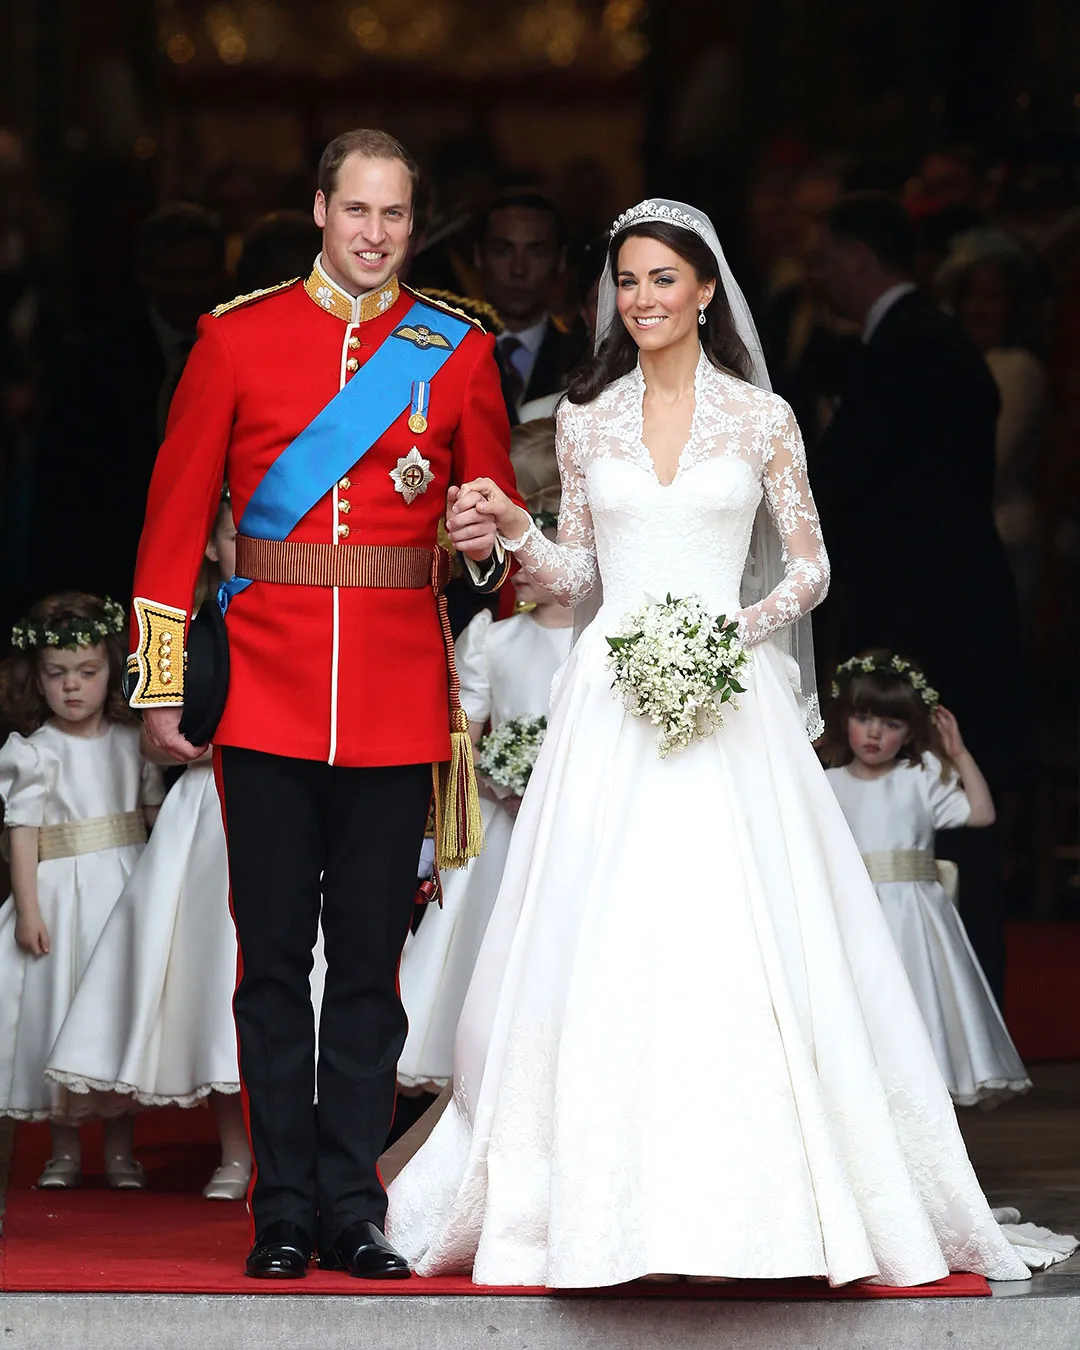 Prince of Wales Wedding Day 2011 Chris Jackson Getty Images